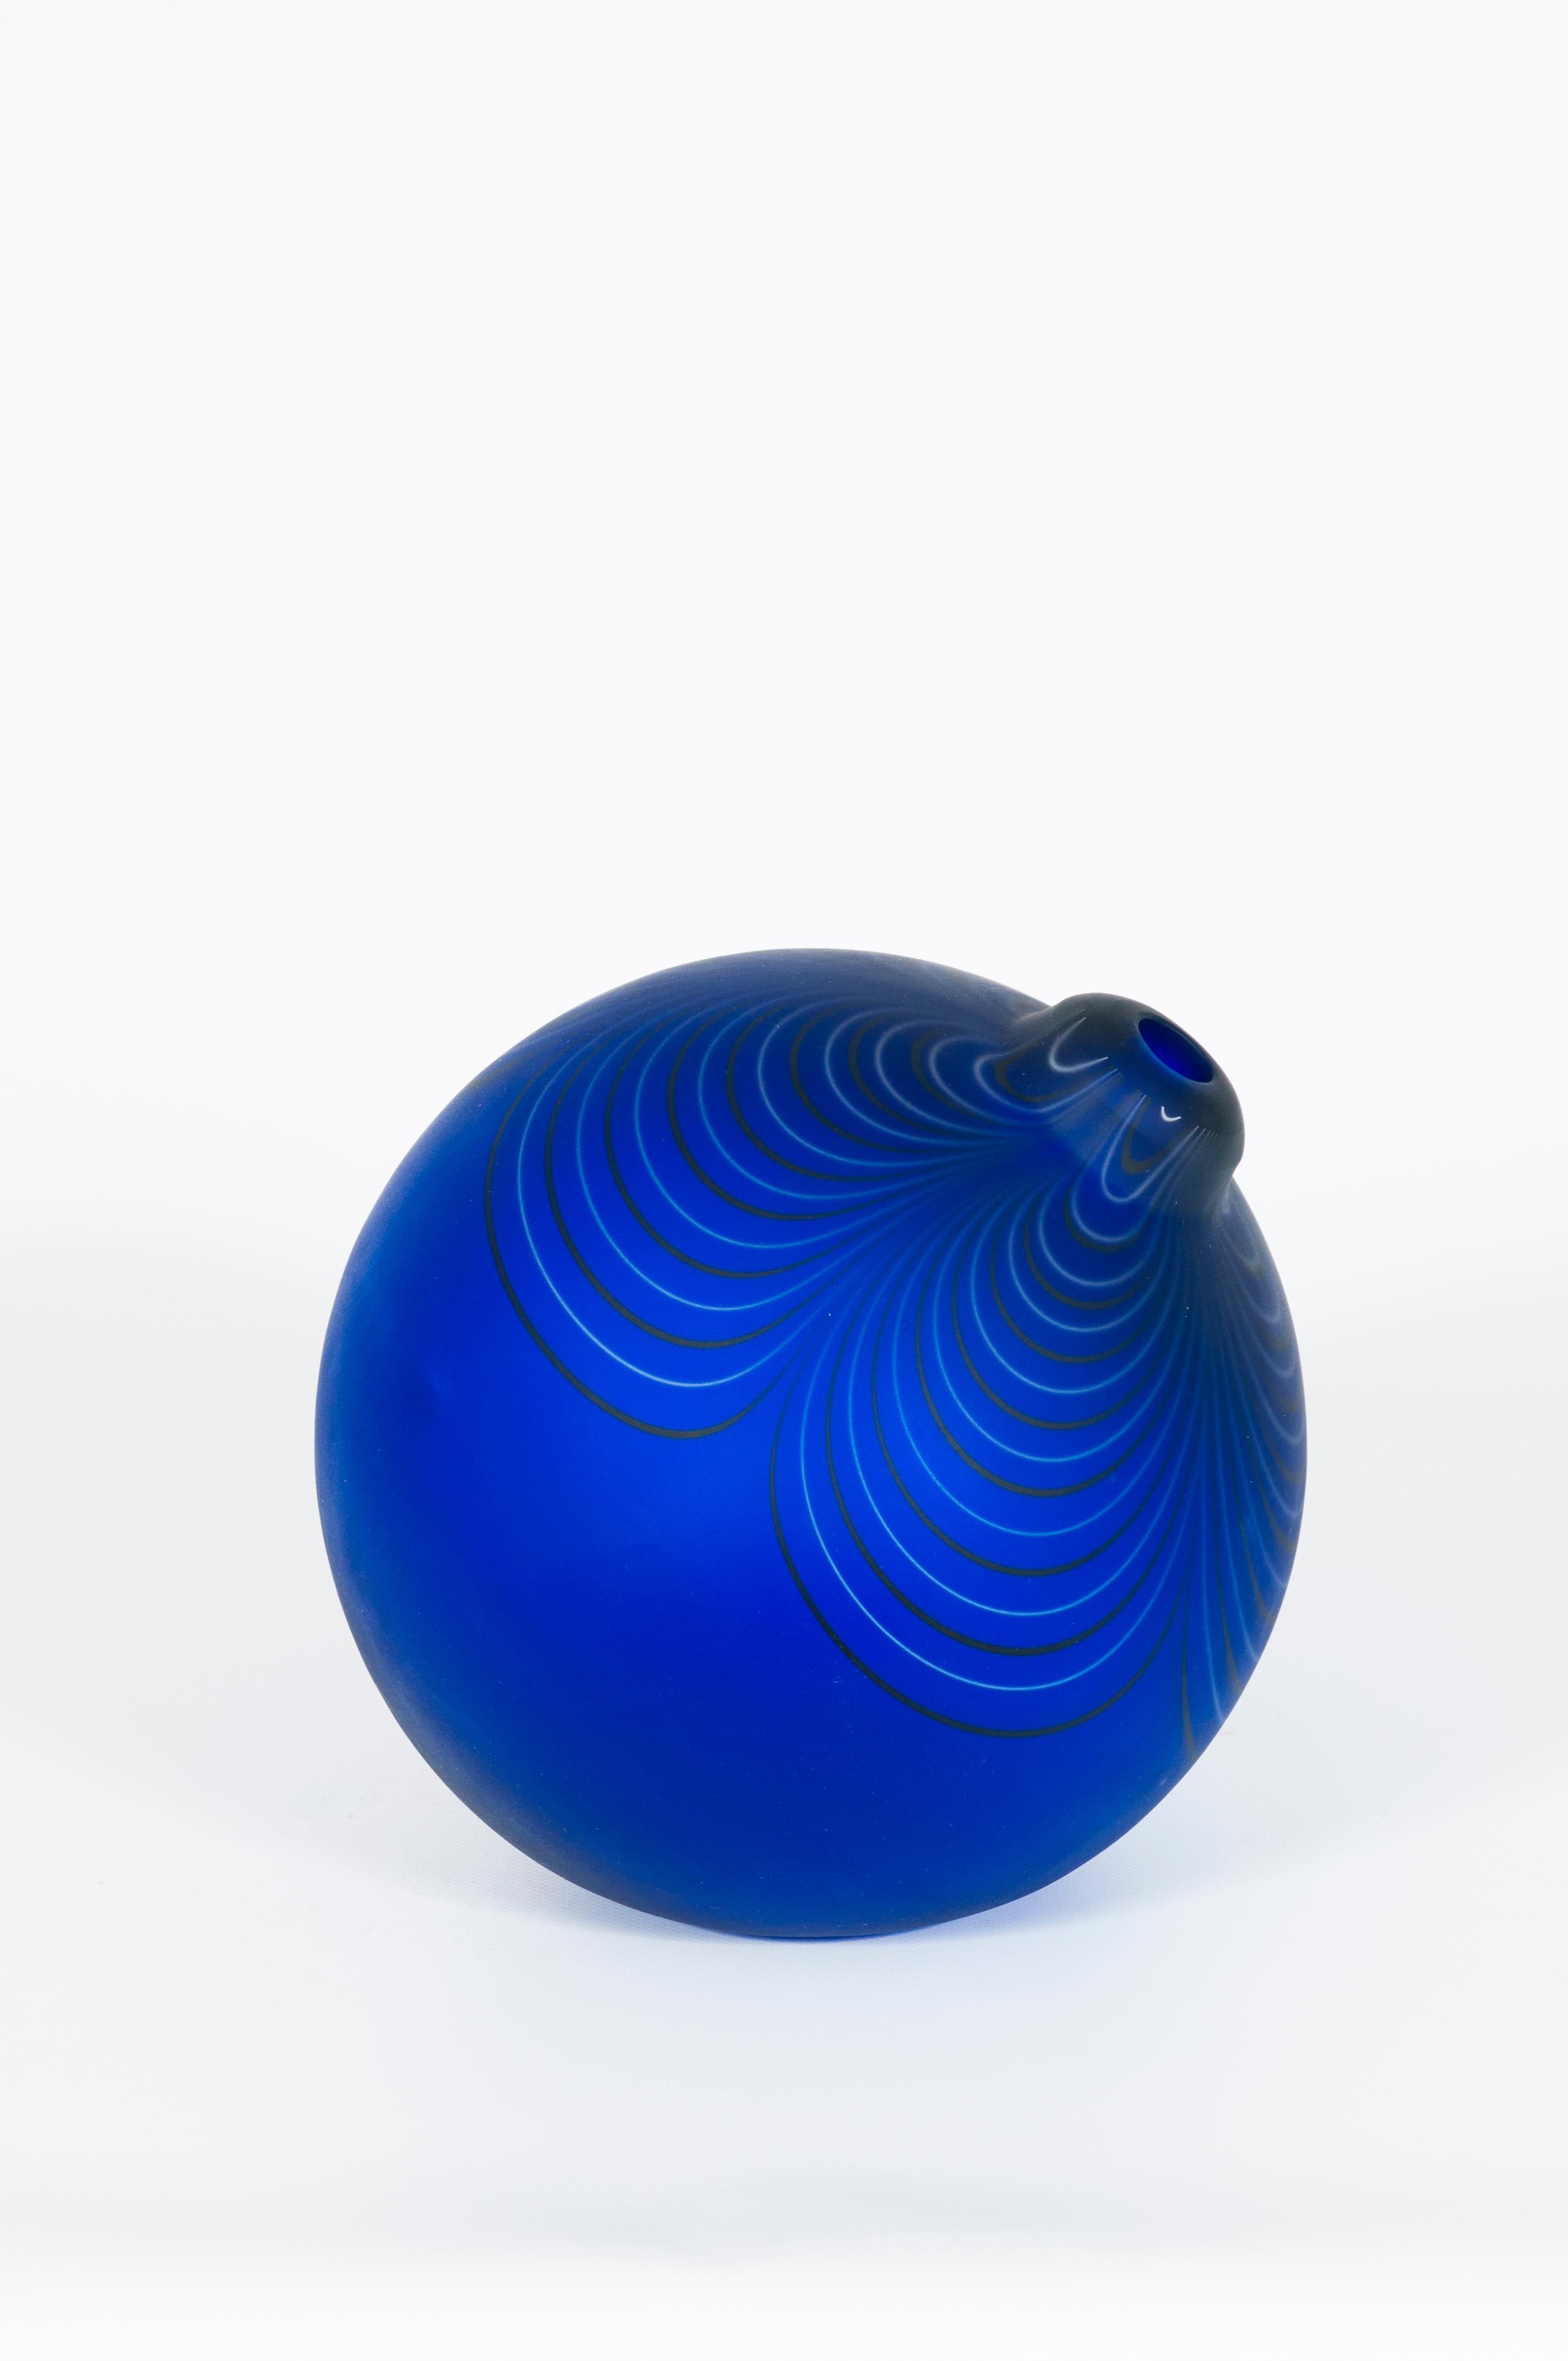 Modern Design Murano Glass Blue Sphere by Alberto Donà, Italy 1980s For Sale